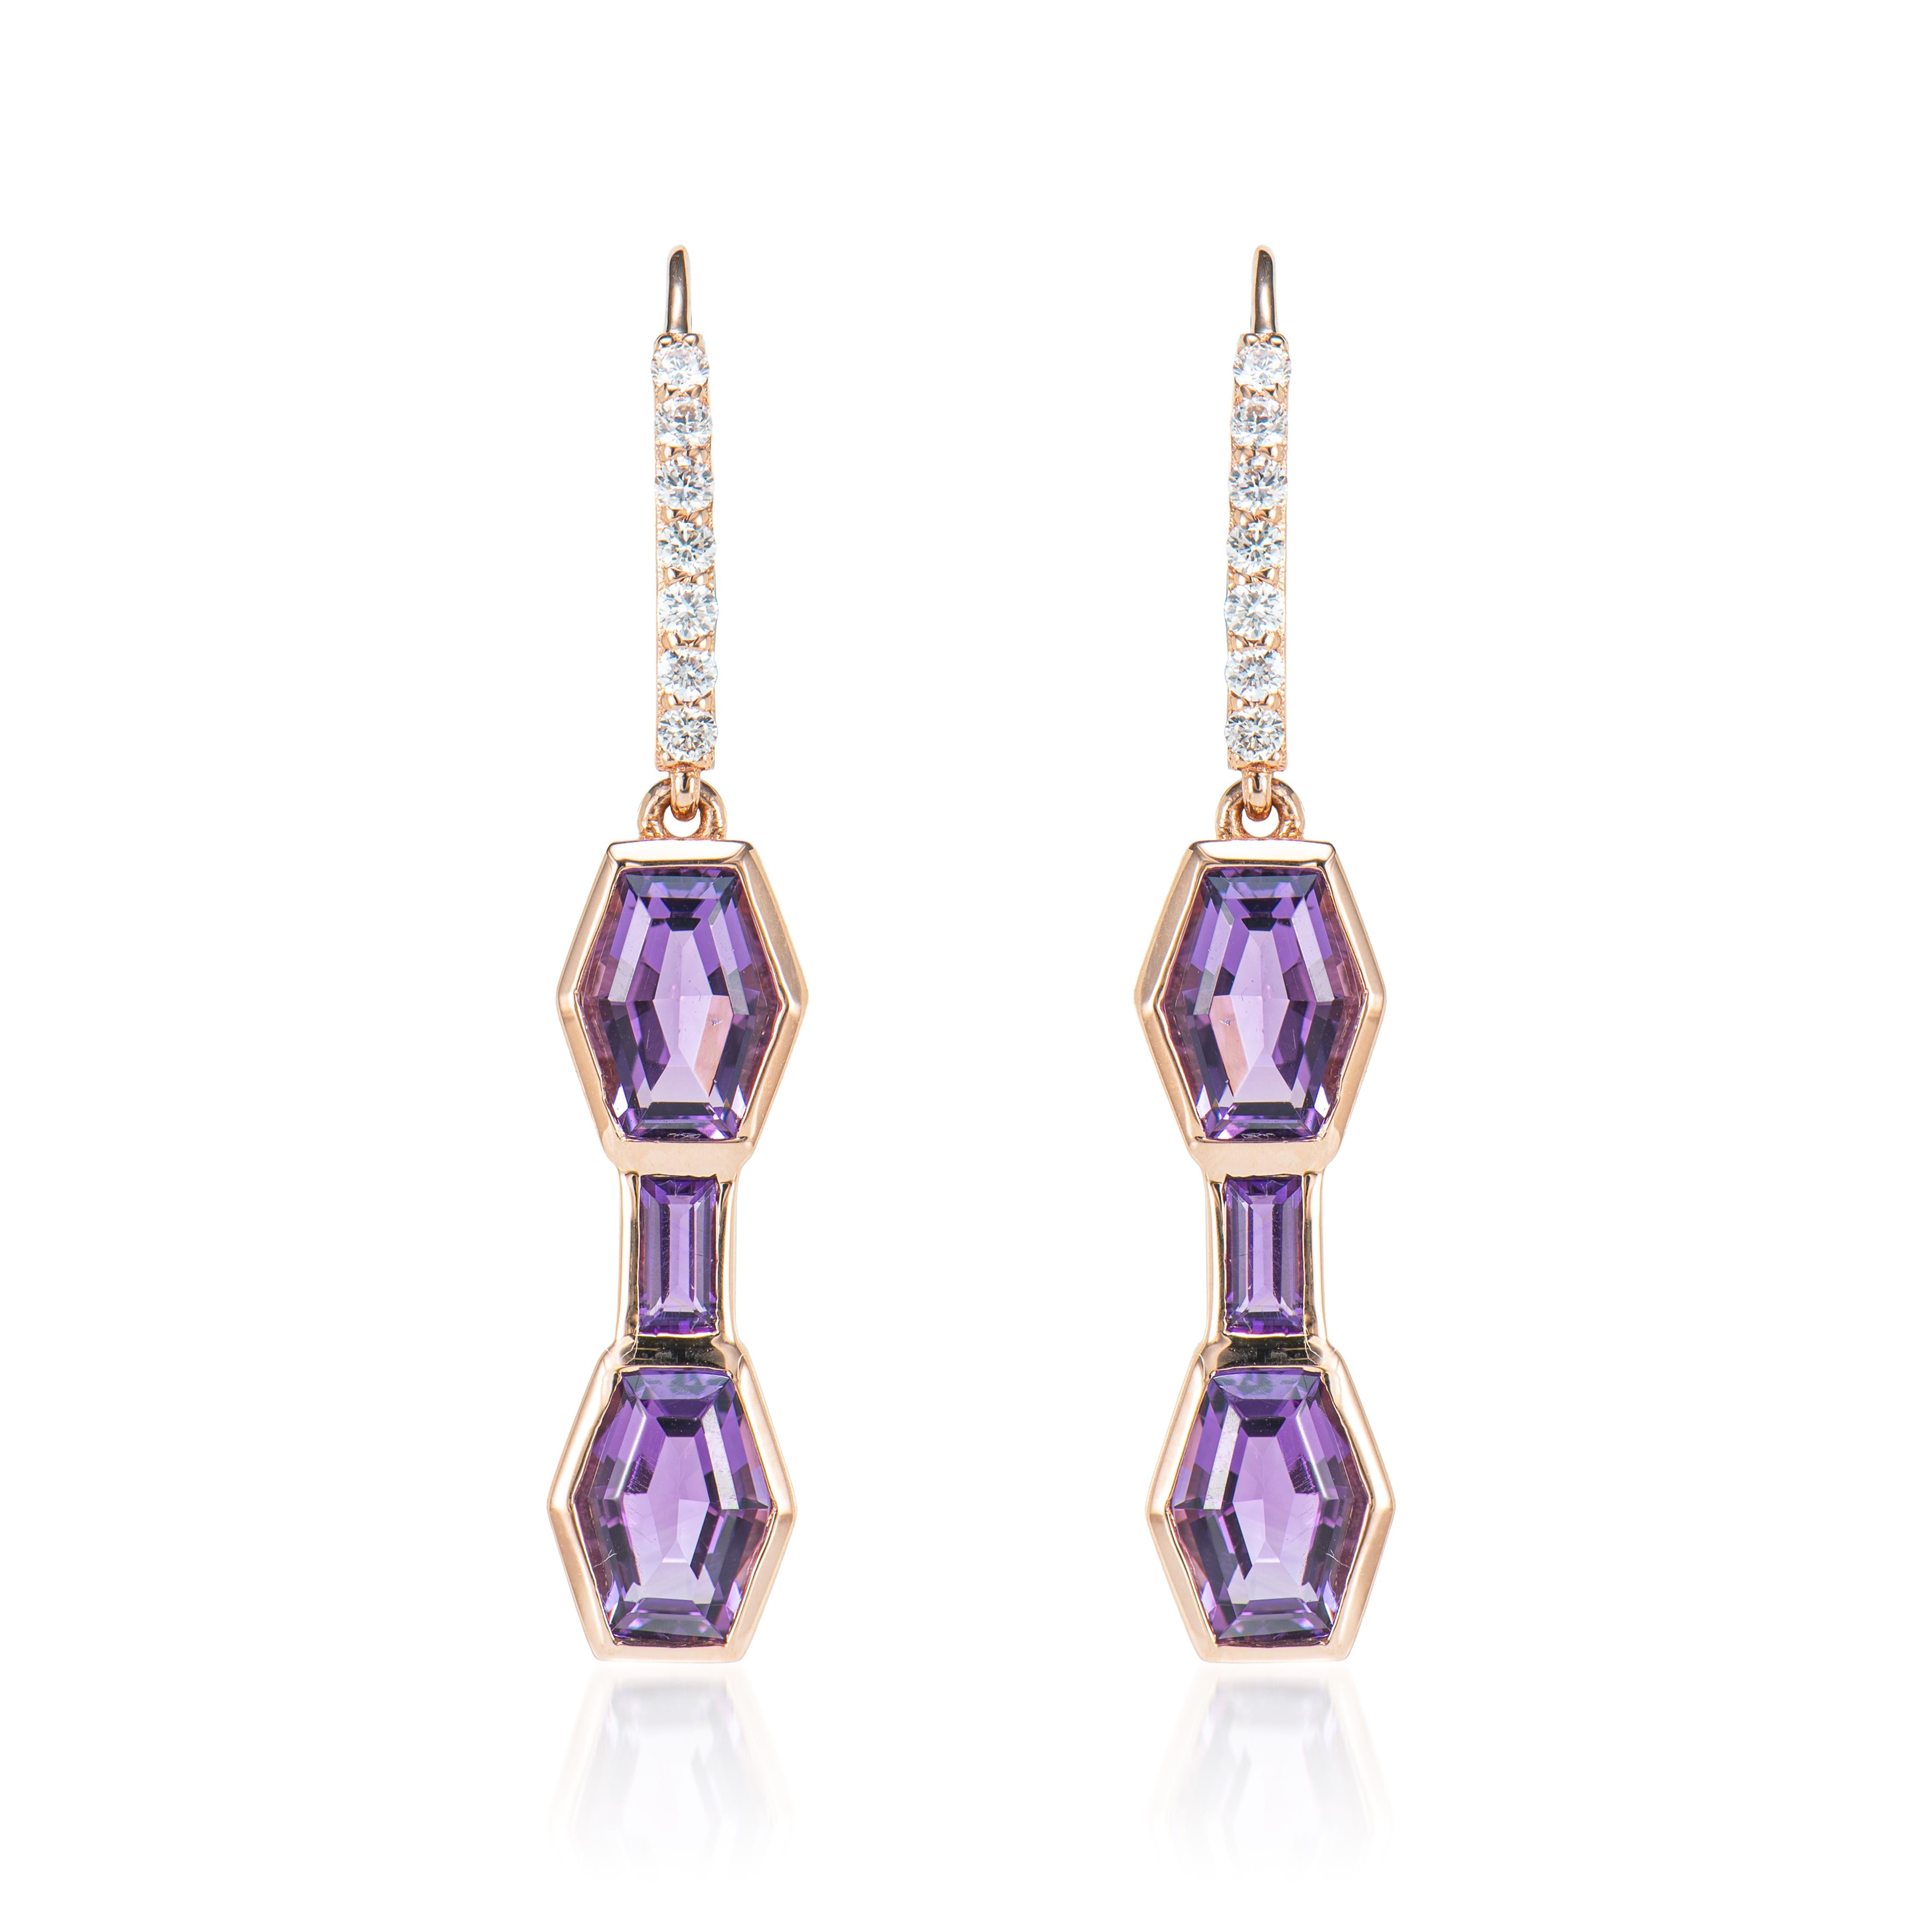 Contemporary 3.10 Carat Amethyst Drop Earrings in 14 Karat Rose Gold with White Diamond. For Sale